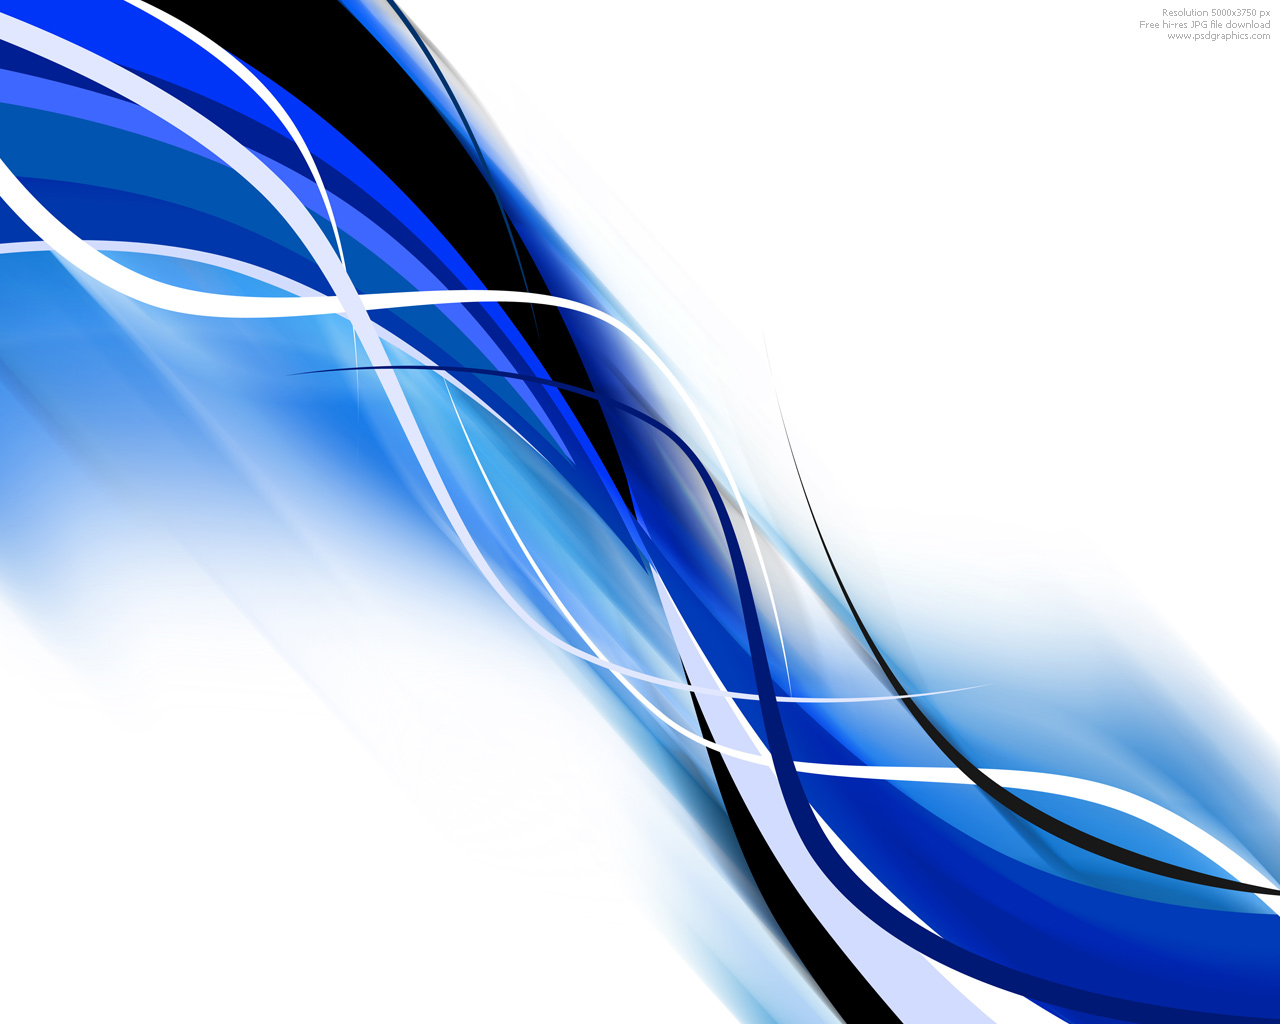 Red and blue abstract waves backgrounds PSDGraphics 1280x1024